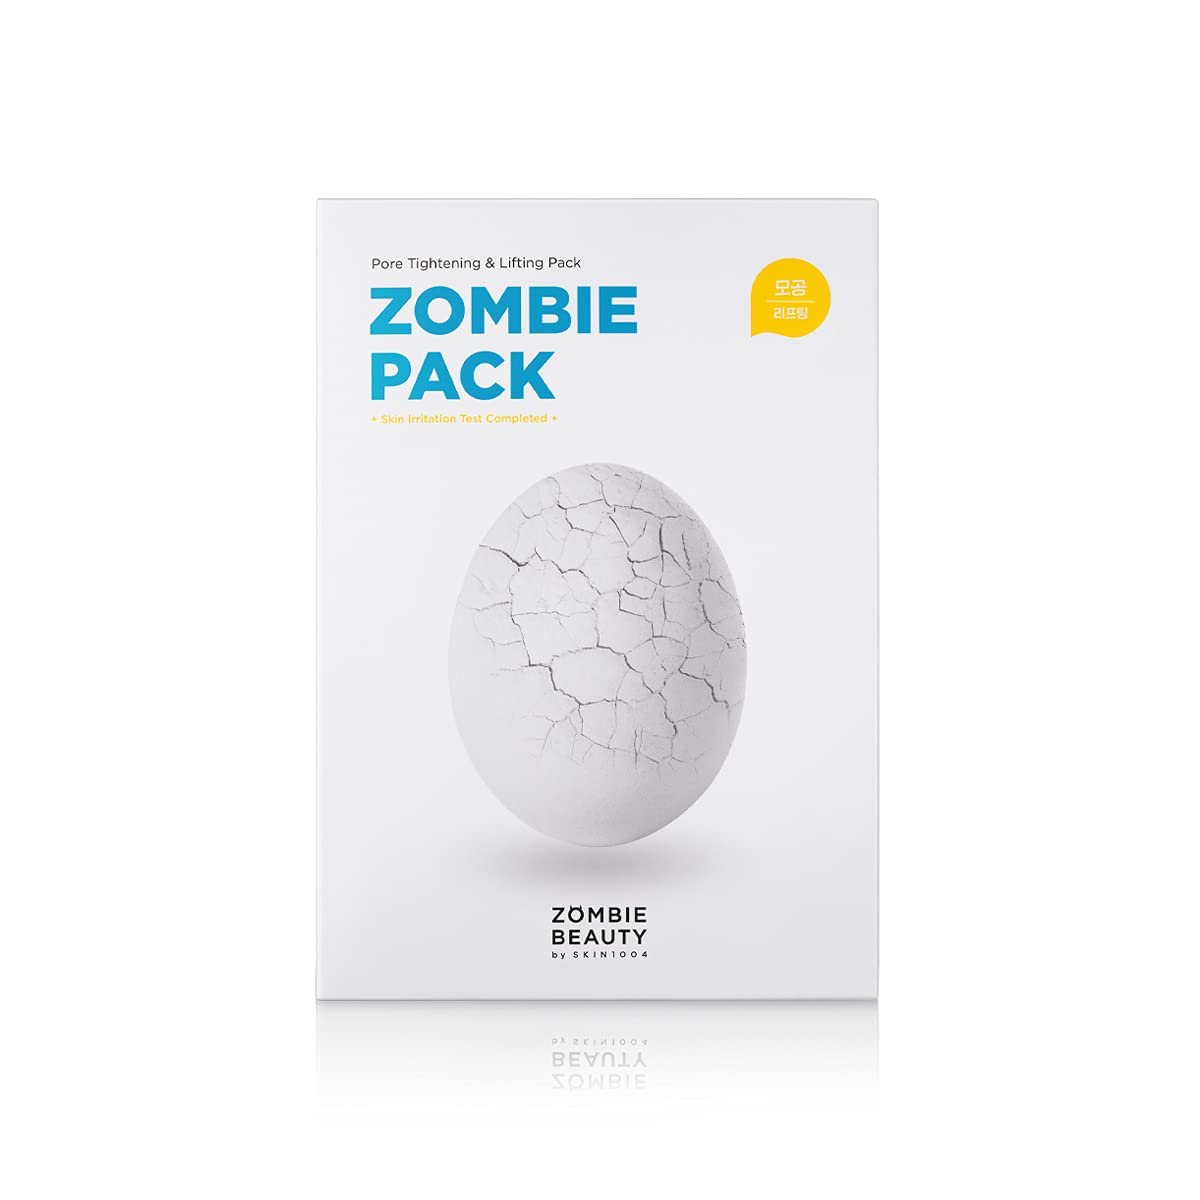 SKIN1004 Zombie Pack 1 Box Review